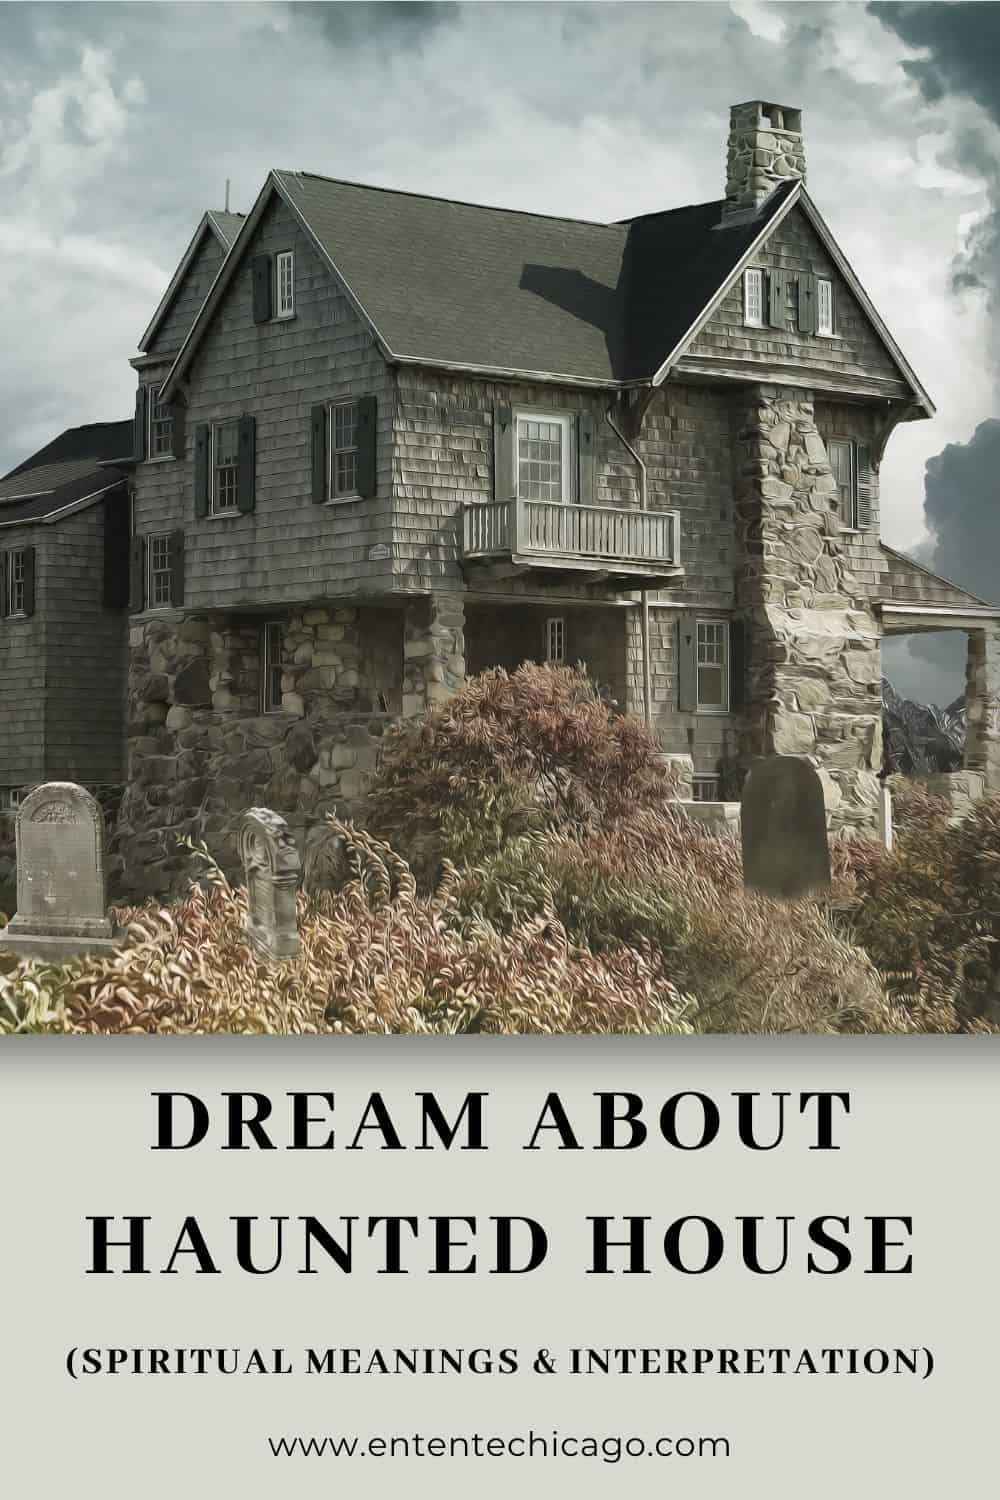 What Does Your Dream About a Haunted House Mean